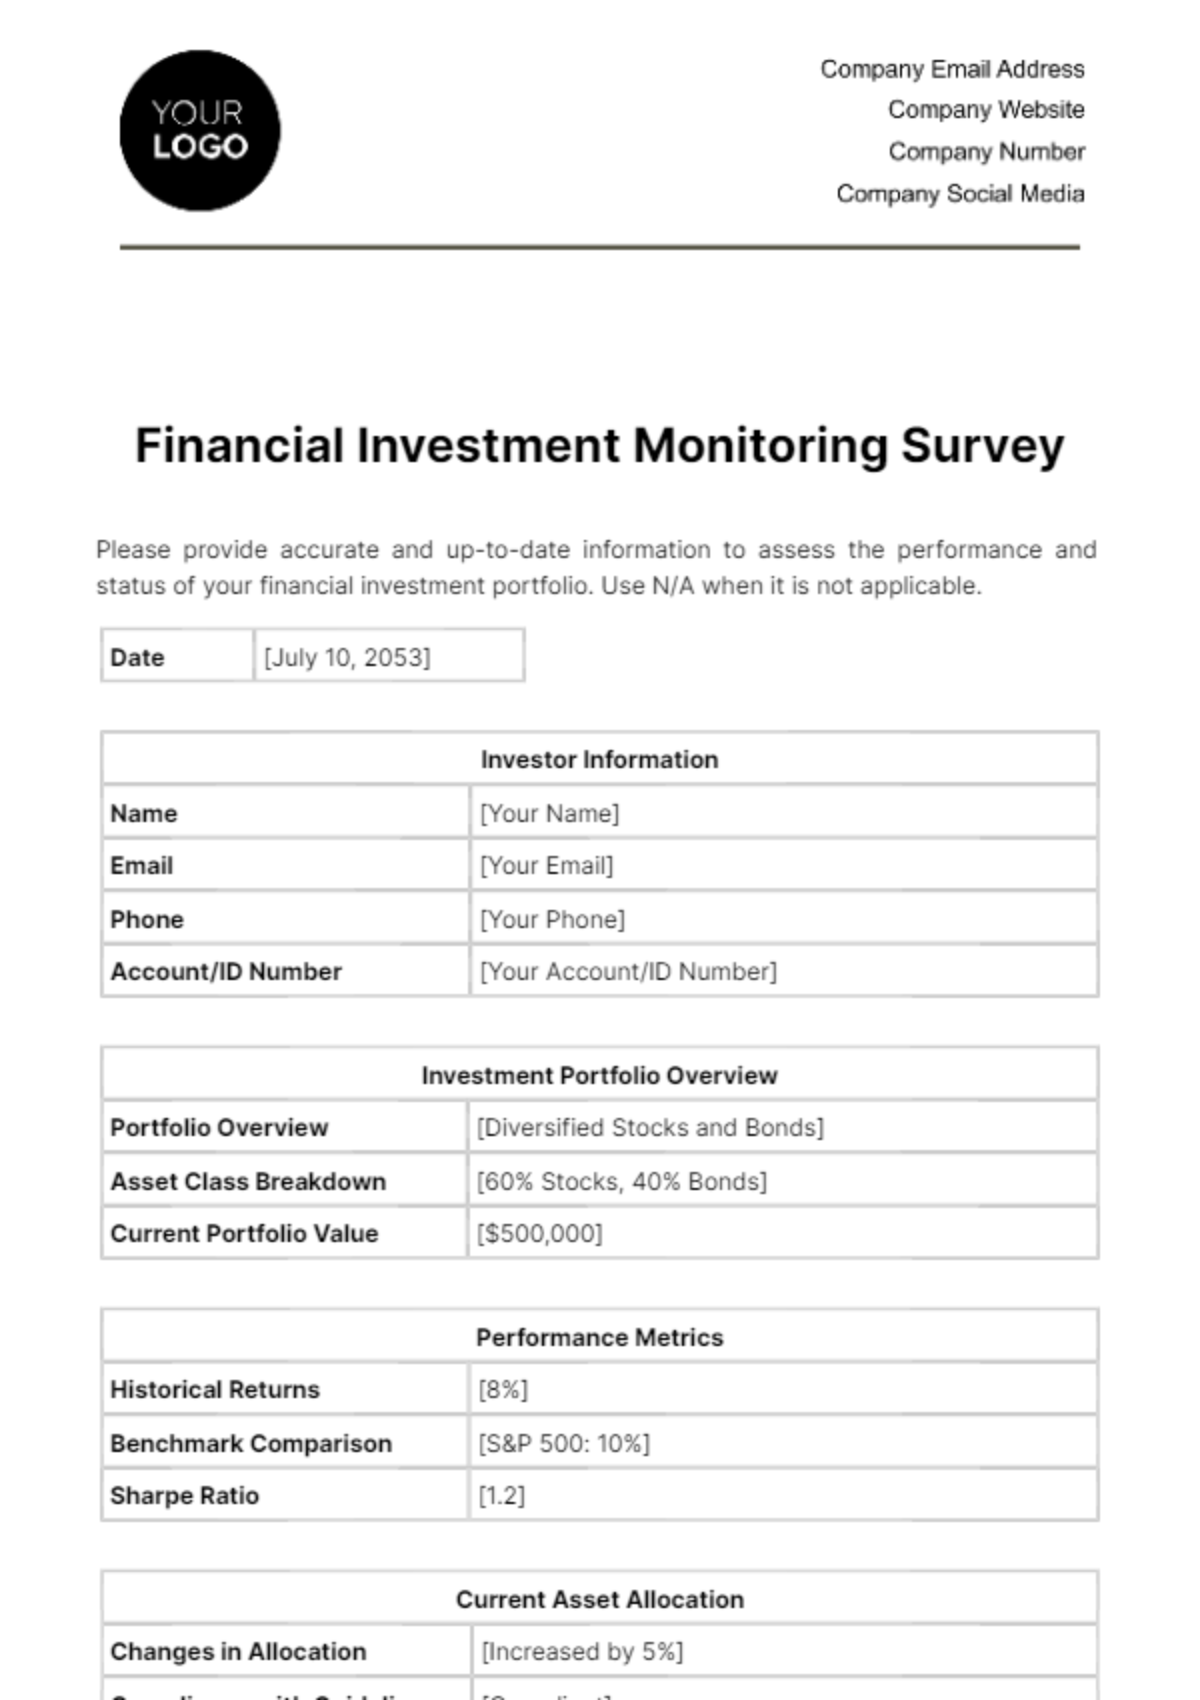 Free Financial Investment Monitoring Survey Template